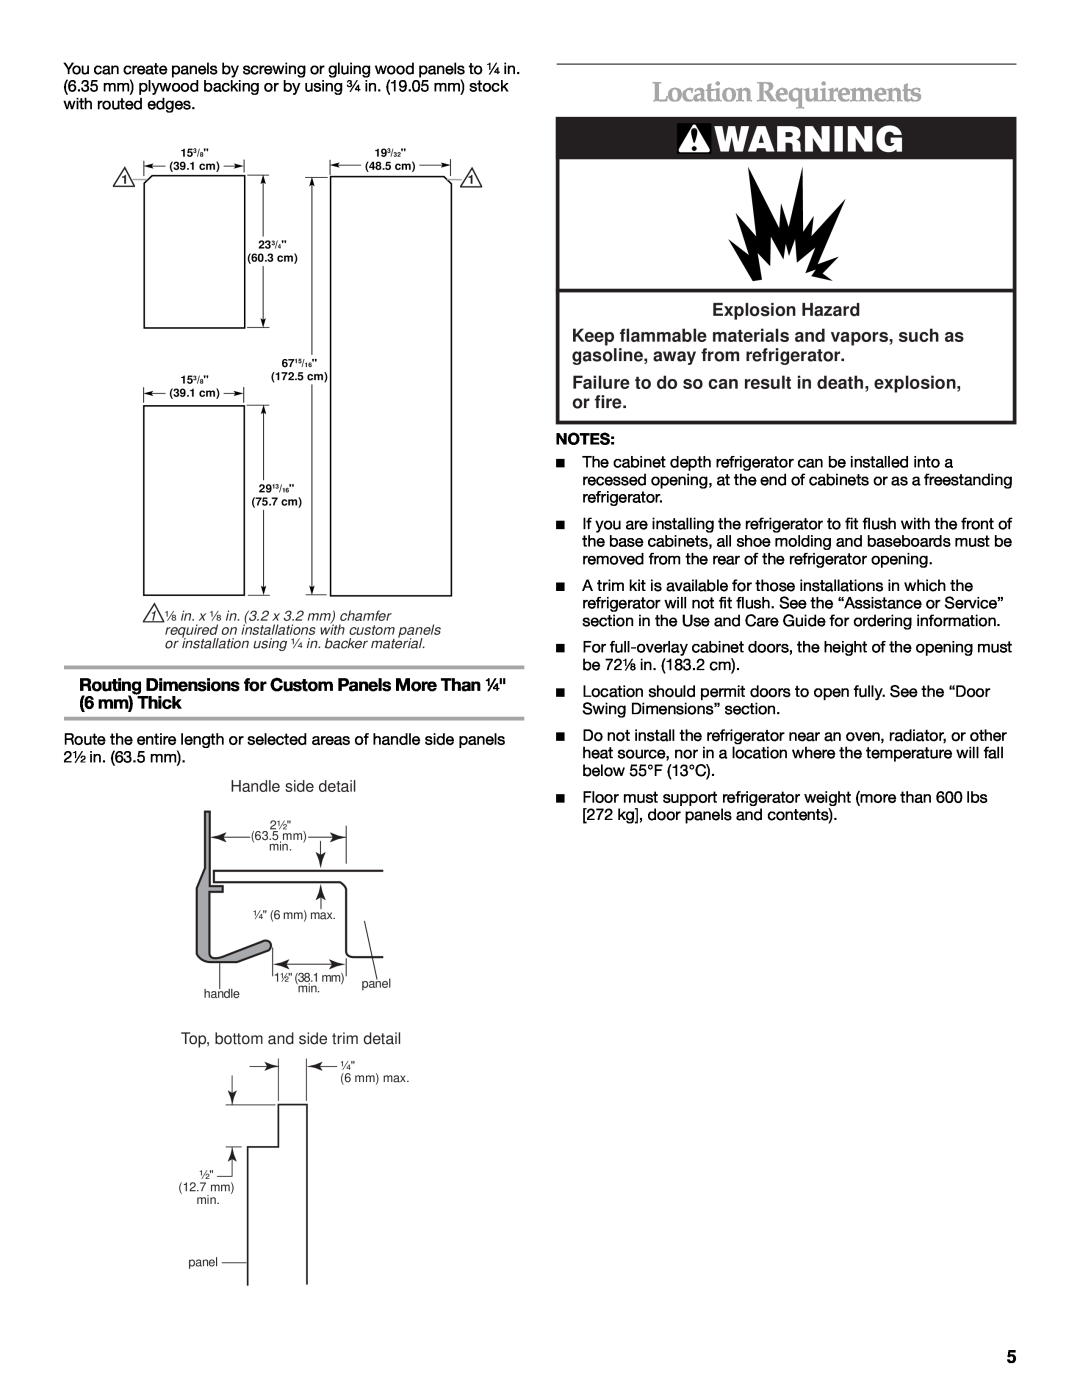 KitchenAid 2221514A Location Requirements, Routing Dimensions for Custom Panels More Than ¹⁄₄ 6 mm Thick, Explosion Hazard 